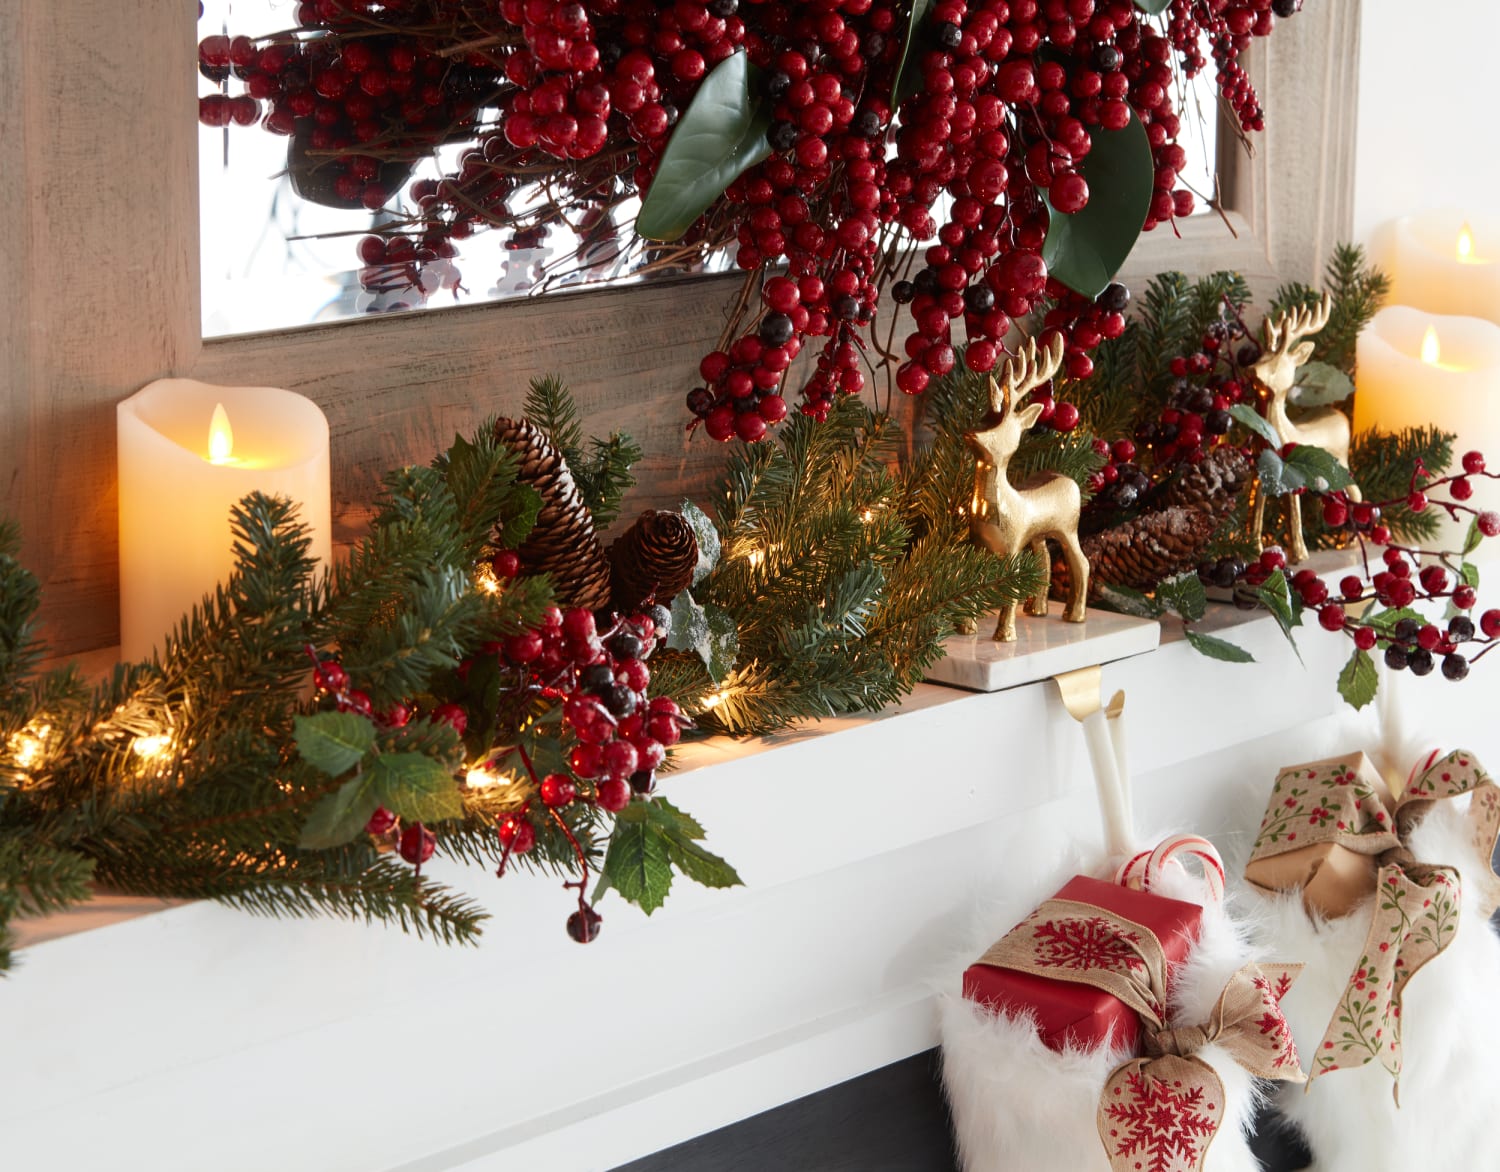 5 fireplace and mantel decoration ideas for Christmas